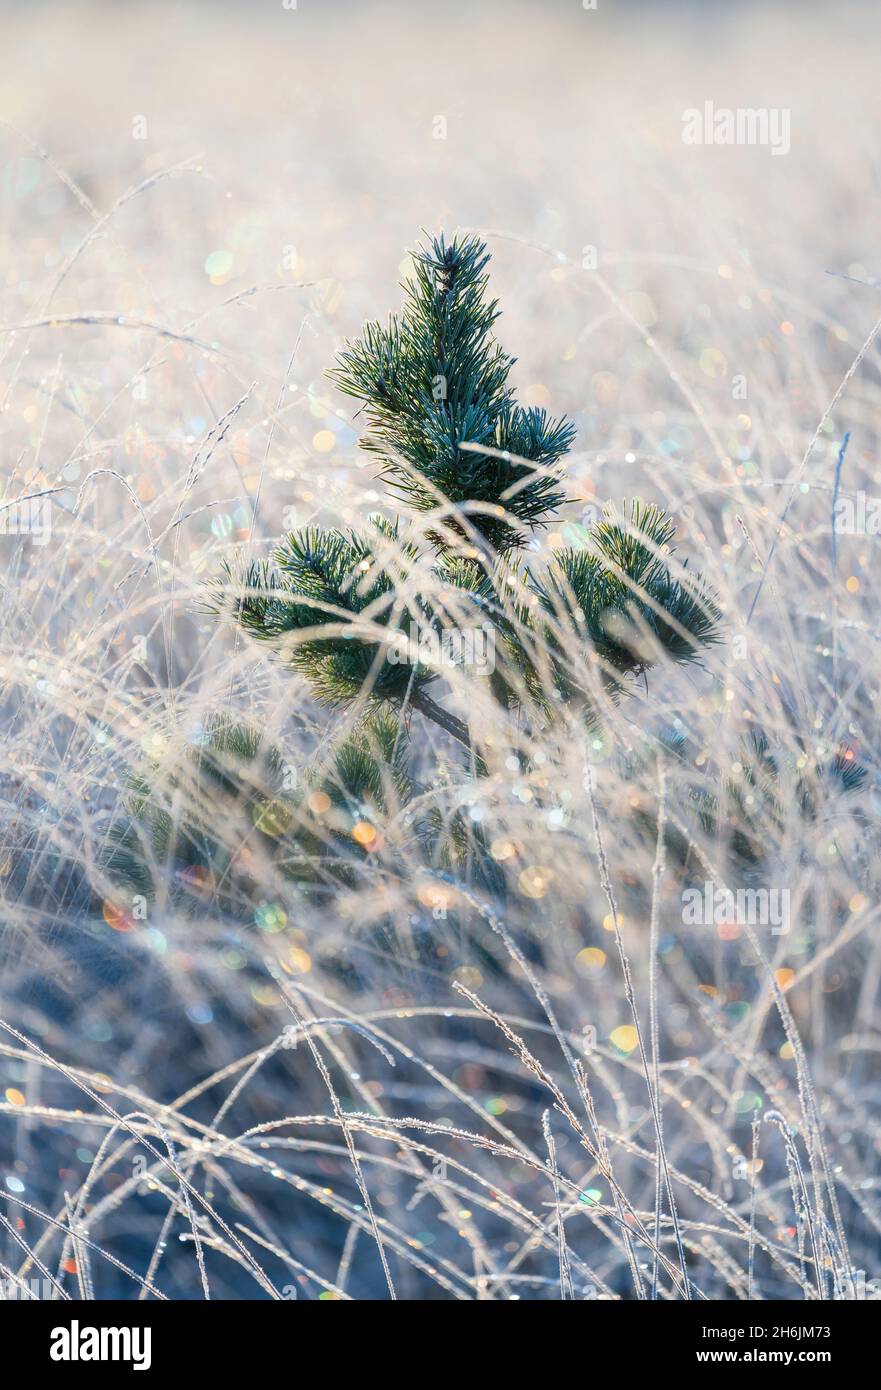 A young pine tree and frozen grass at Strensall Common Nature Reserve in mid-winter, North Yorkshire, England, United Kingdom, Europe Stock Photo